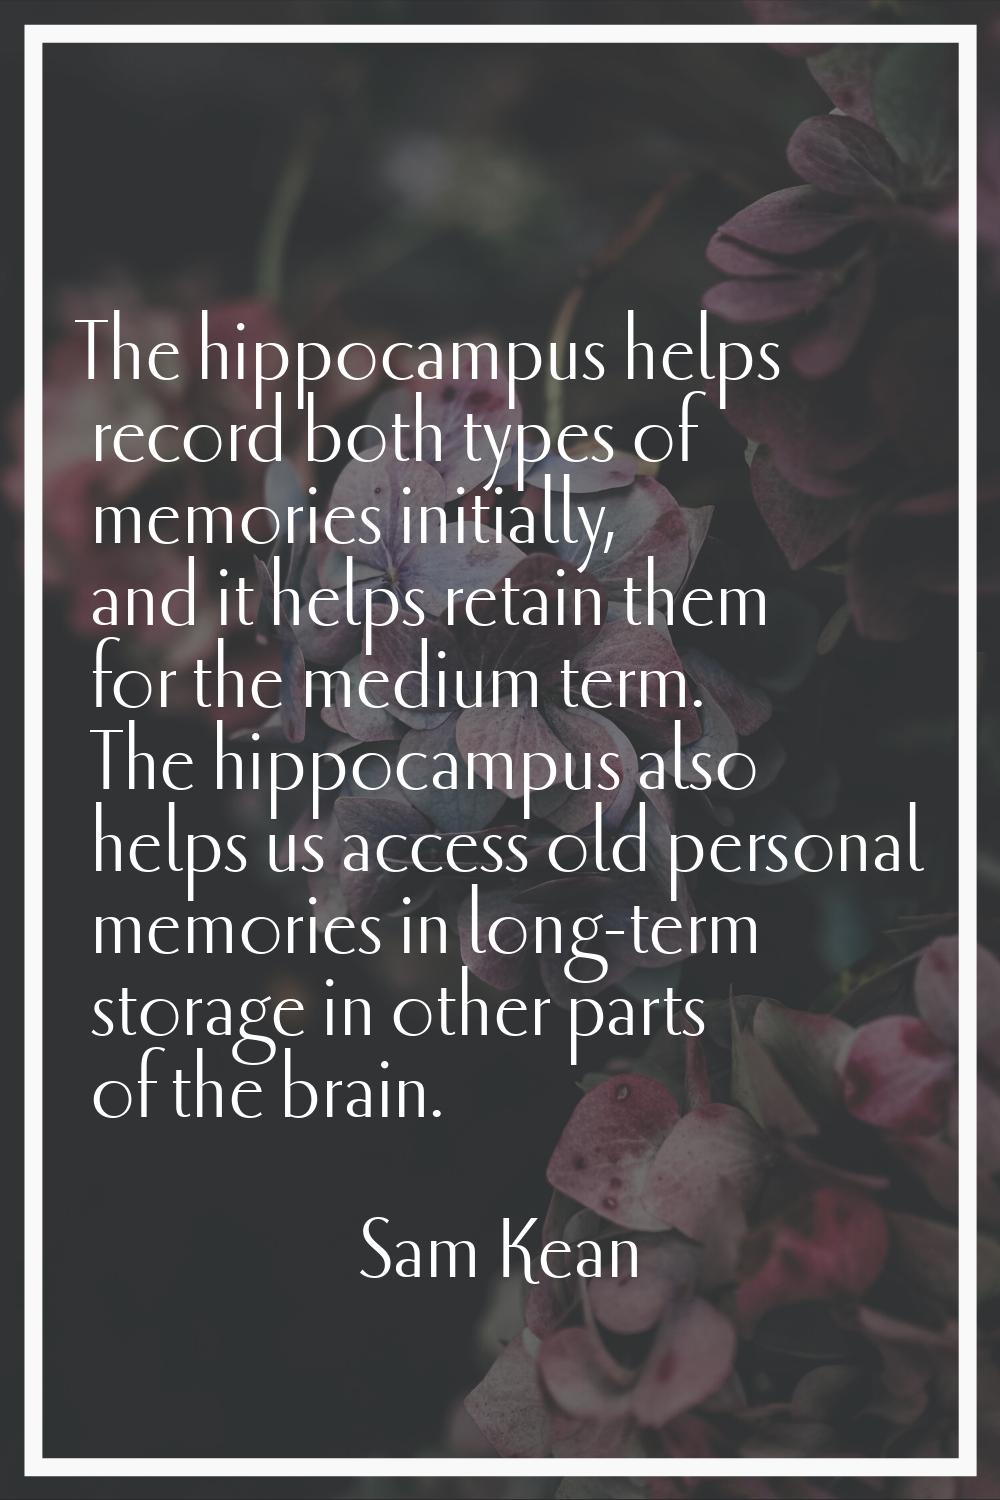 The hippocampus helps record both types of memories initially, and it helps retain them for the med